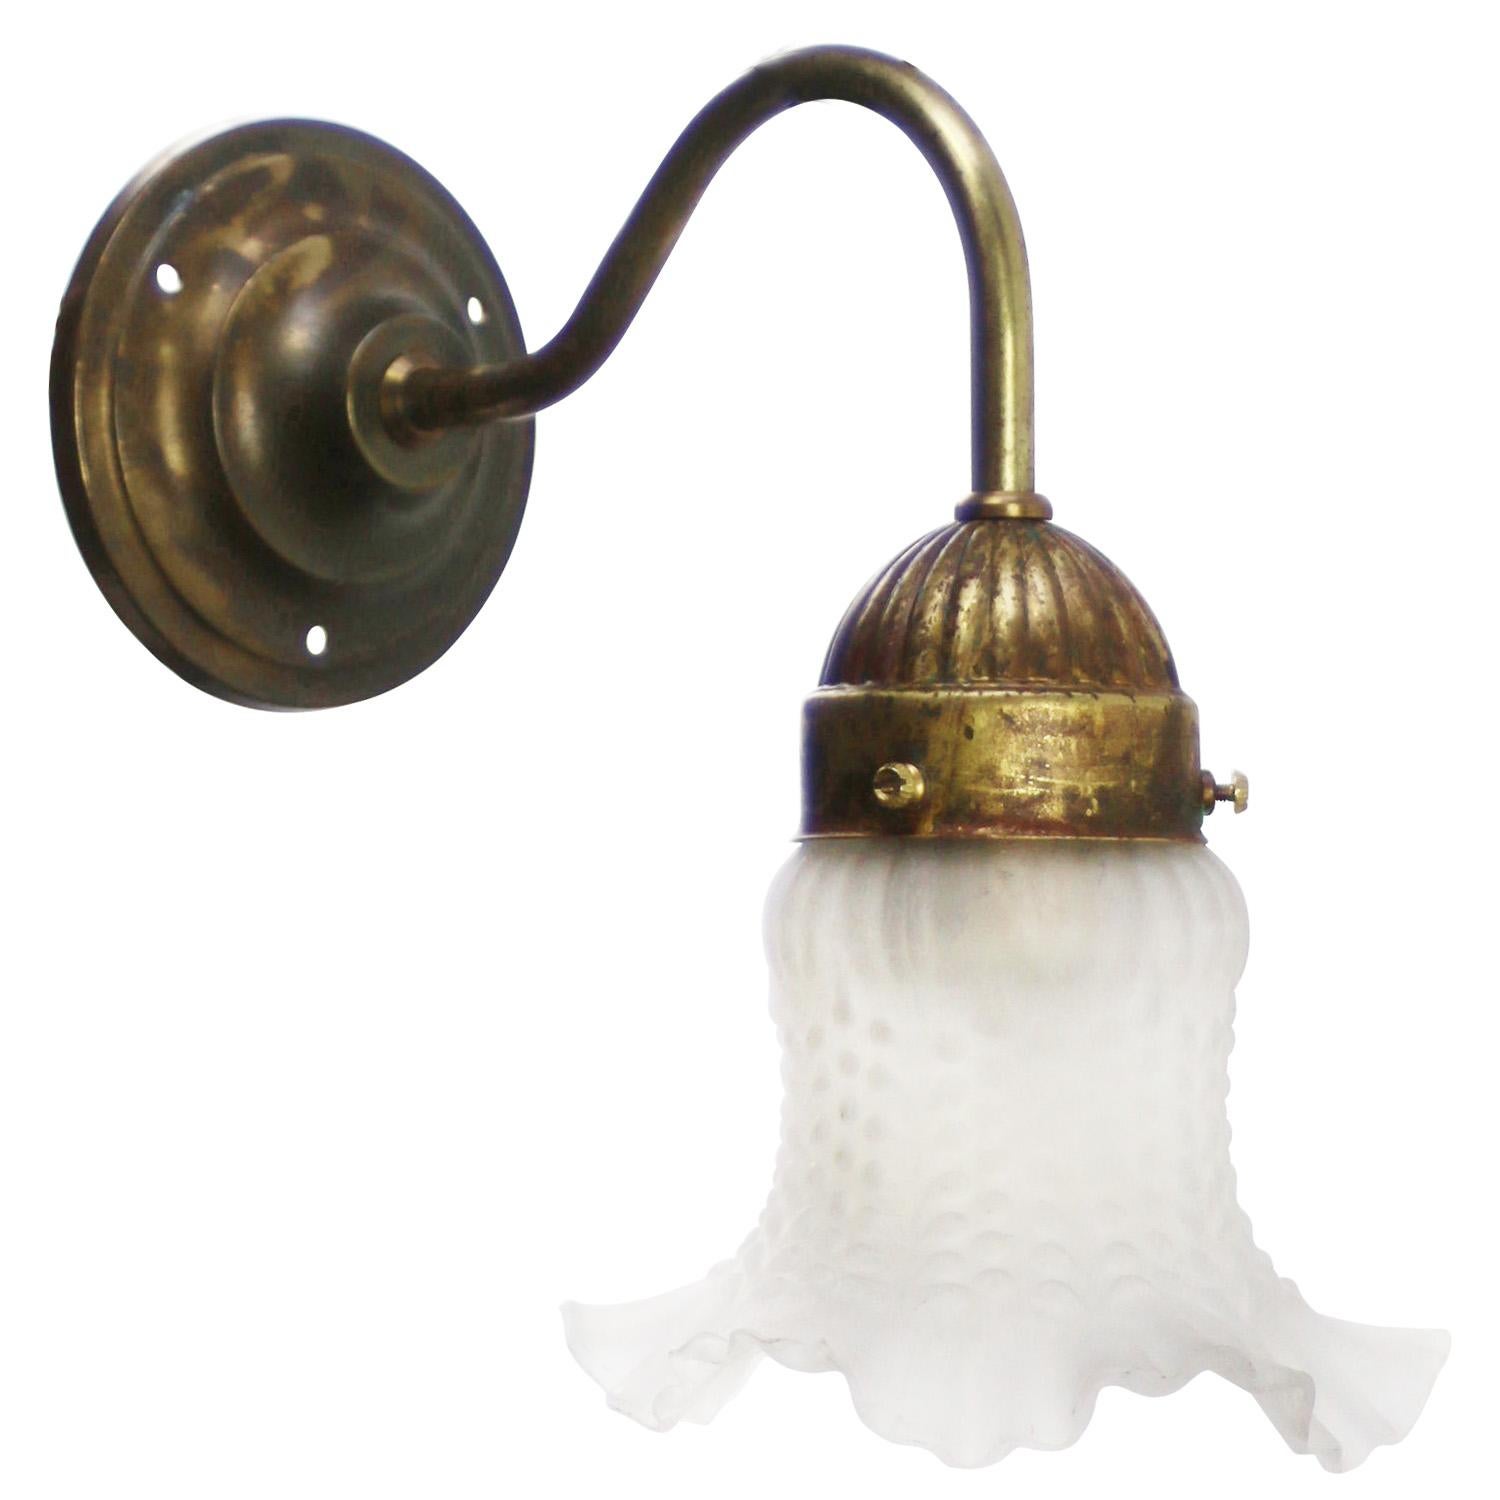 French wall lamp
White marble, opaline glass.
Brass wall piece and arm

diameter brass wall mount: 10 cm / 3.94, 3 holes to secure

Weight: 0.70 kg / 1.5 lb

Multiple flower design glasses in stock, contact for more info

Priced per individual item.